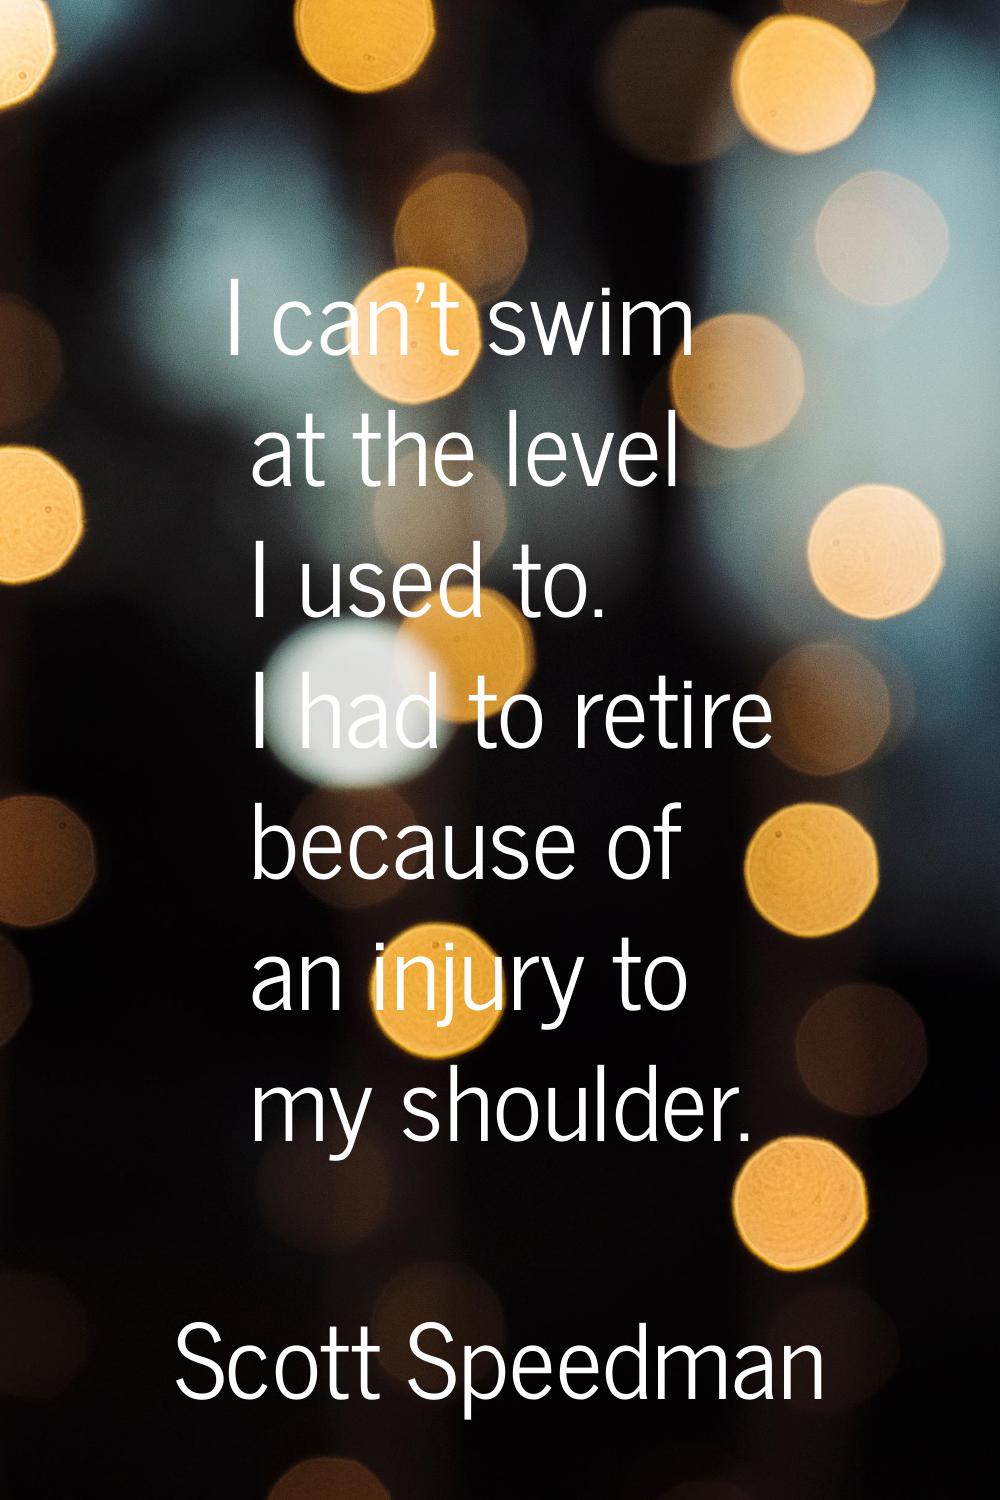 I can't swim at the level I used to. I had to retire because of an injury to my shoulder.